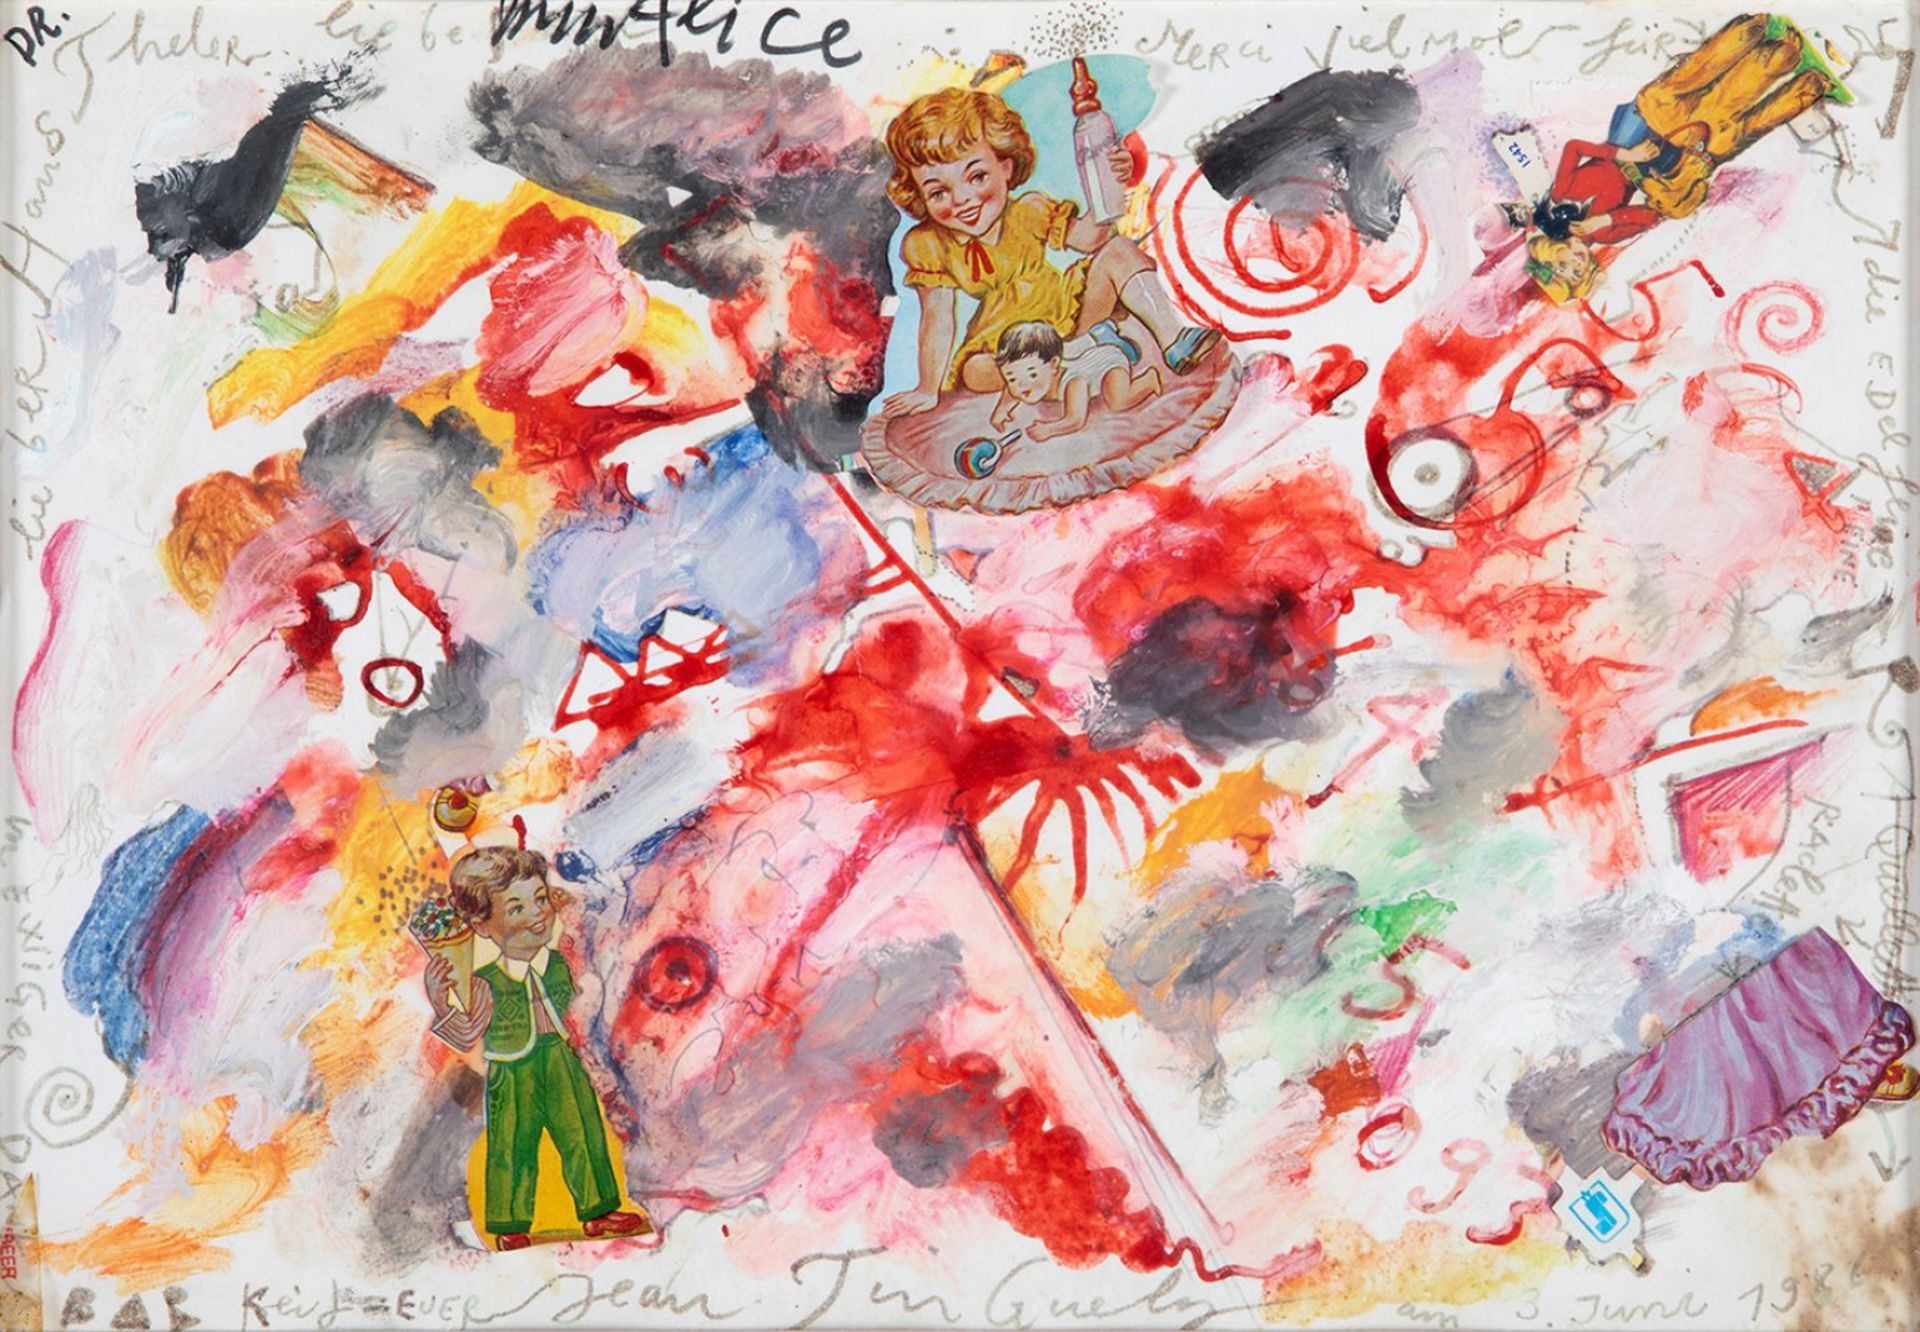 JEAN TINGUELY (Switzerland, 1925 -1991).Untitled, 1986.Mixed media and collage on paper.Signed and